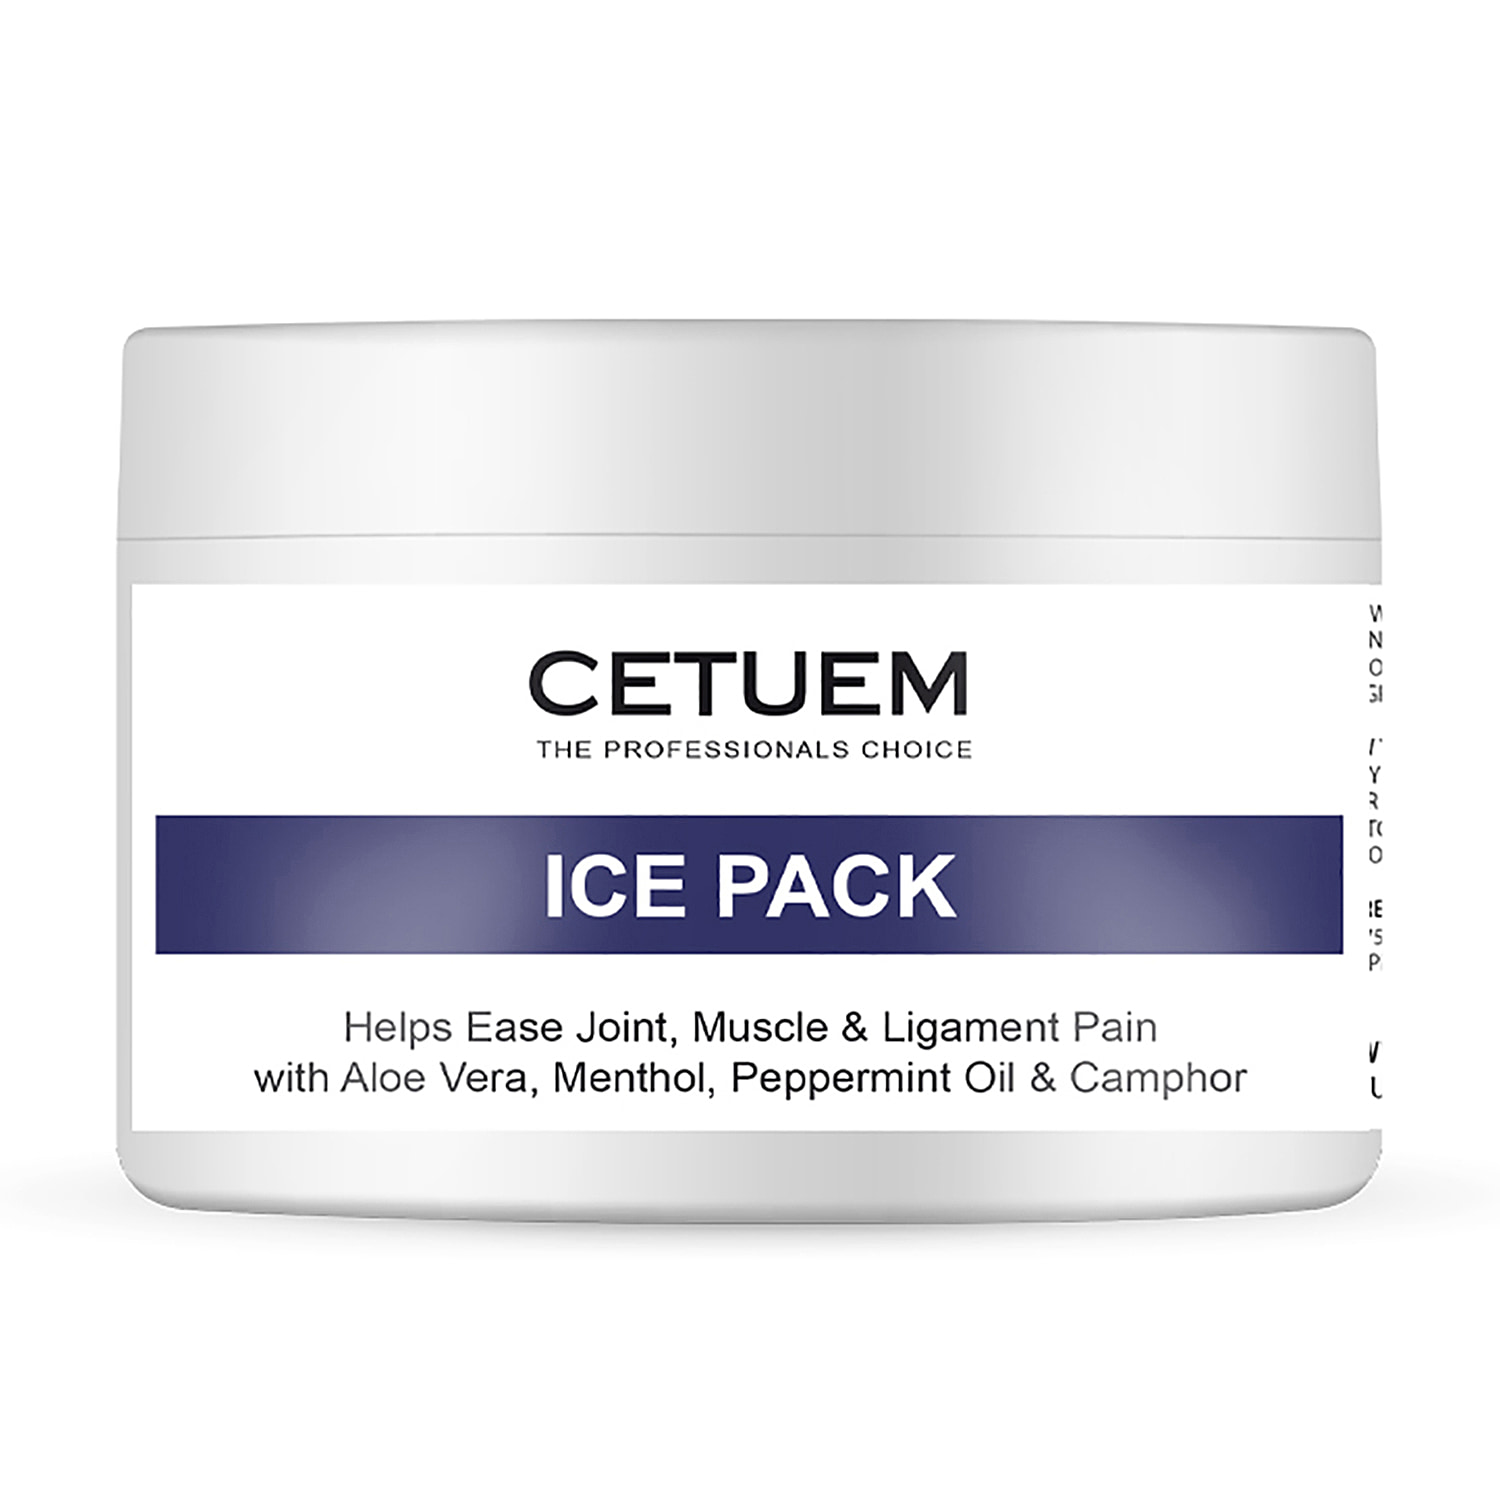 Cetuem Ice Pack for Pain Relief Muscle aches and Joint Discomfort caused by Minor Backaches, Tendinitis, and Overuse of Muscles